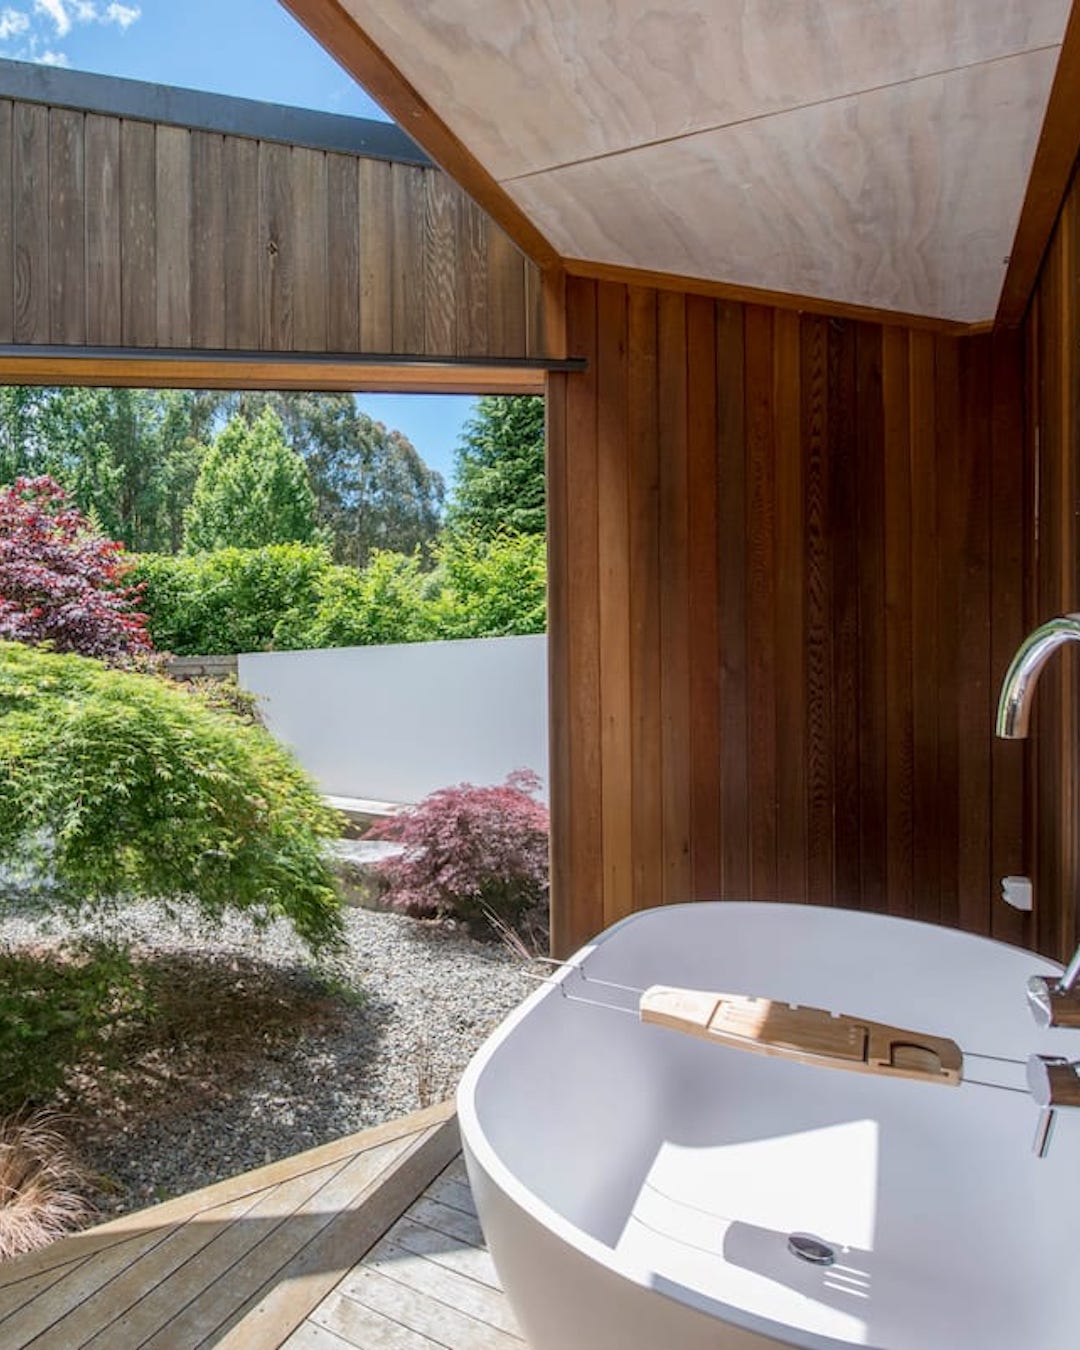 A large bathtub looking out to a Japanese-style garden